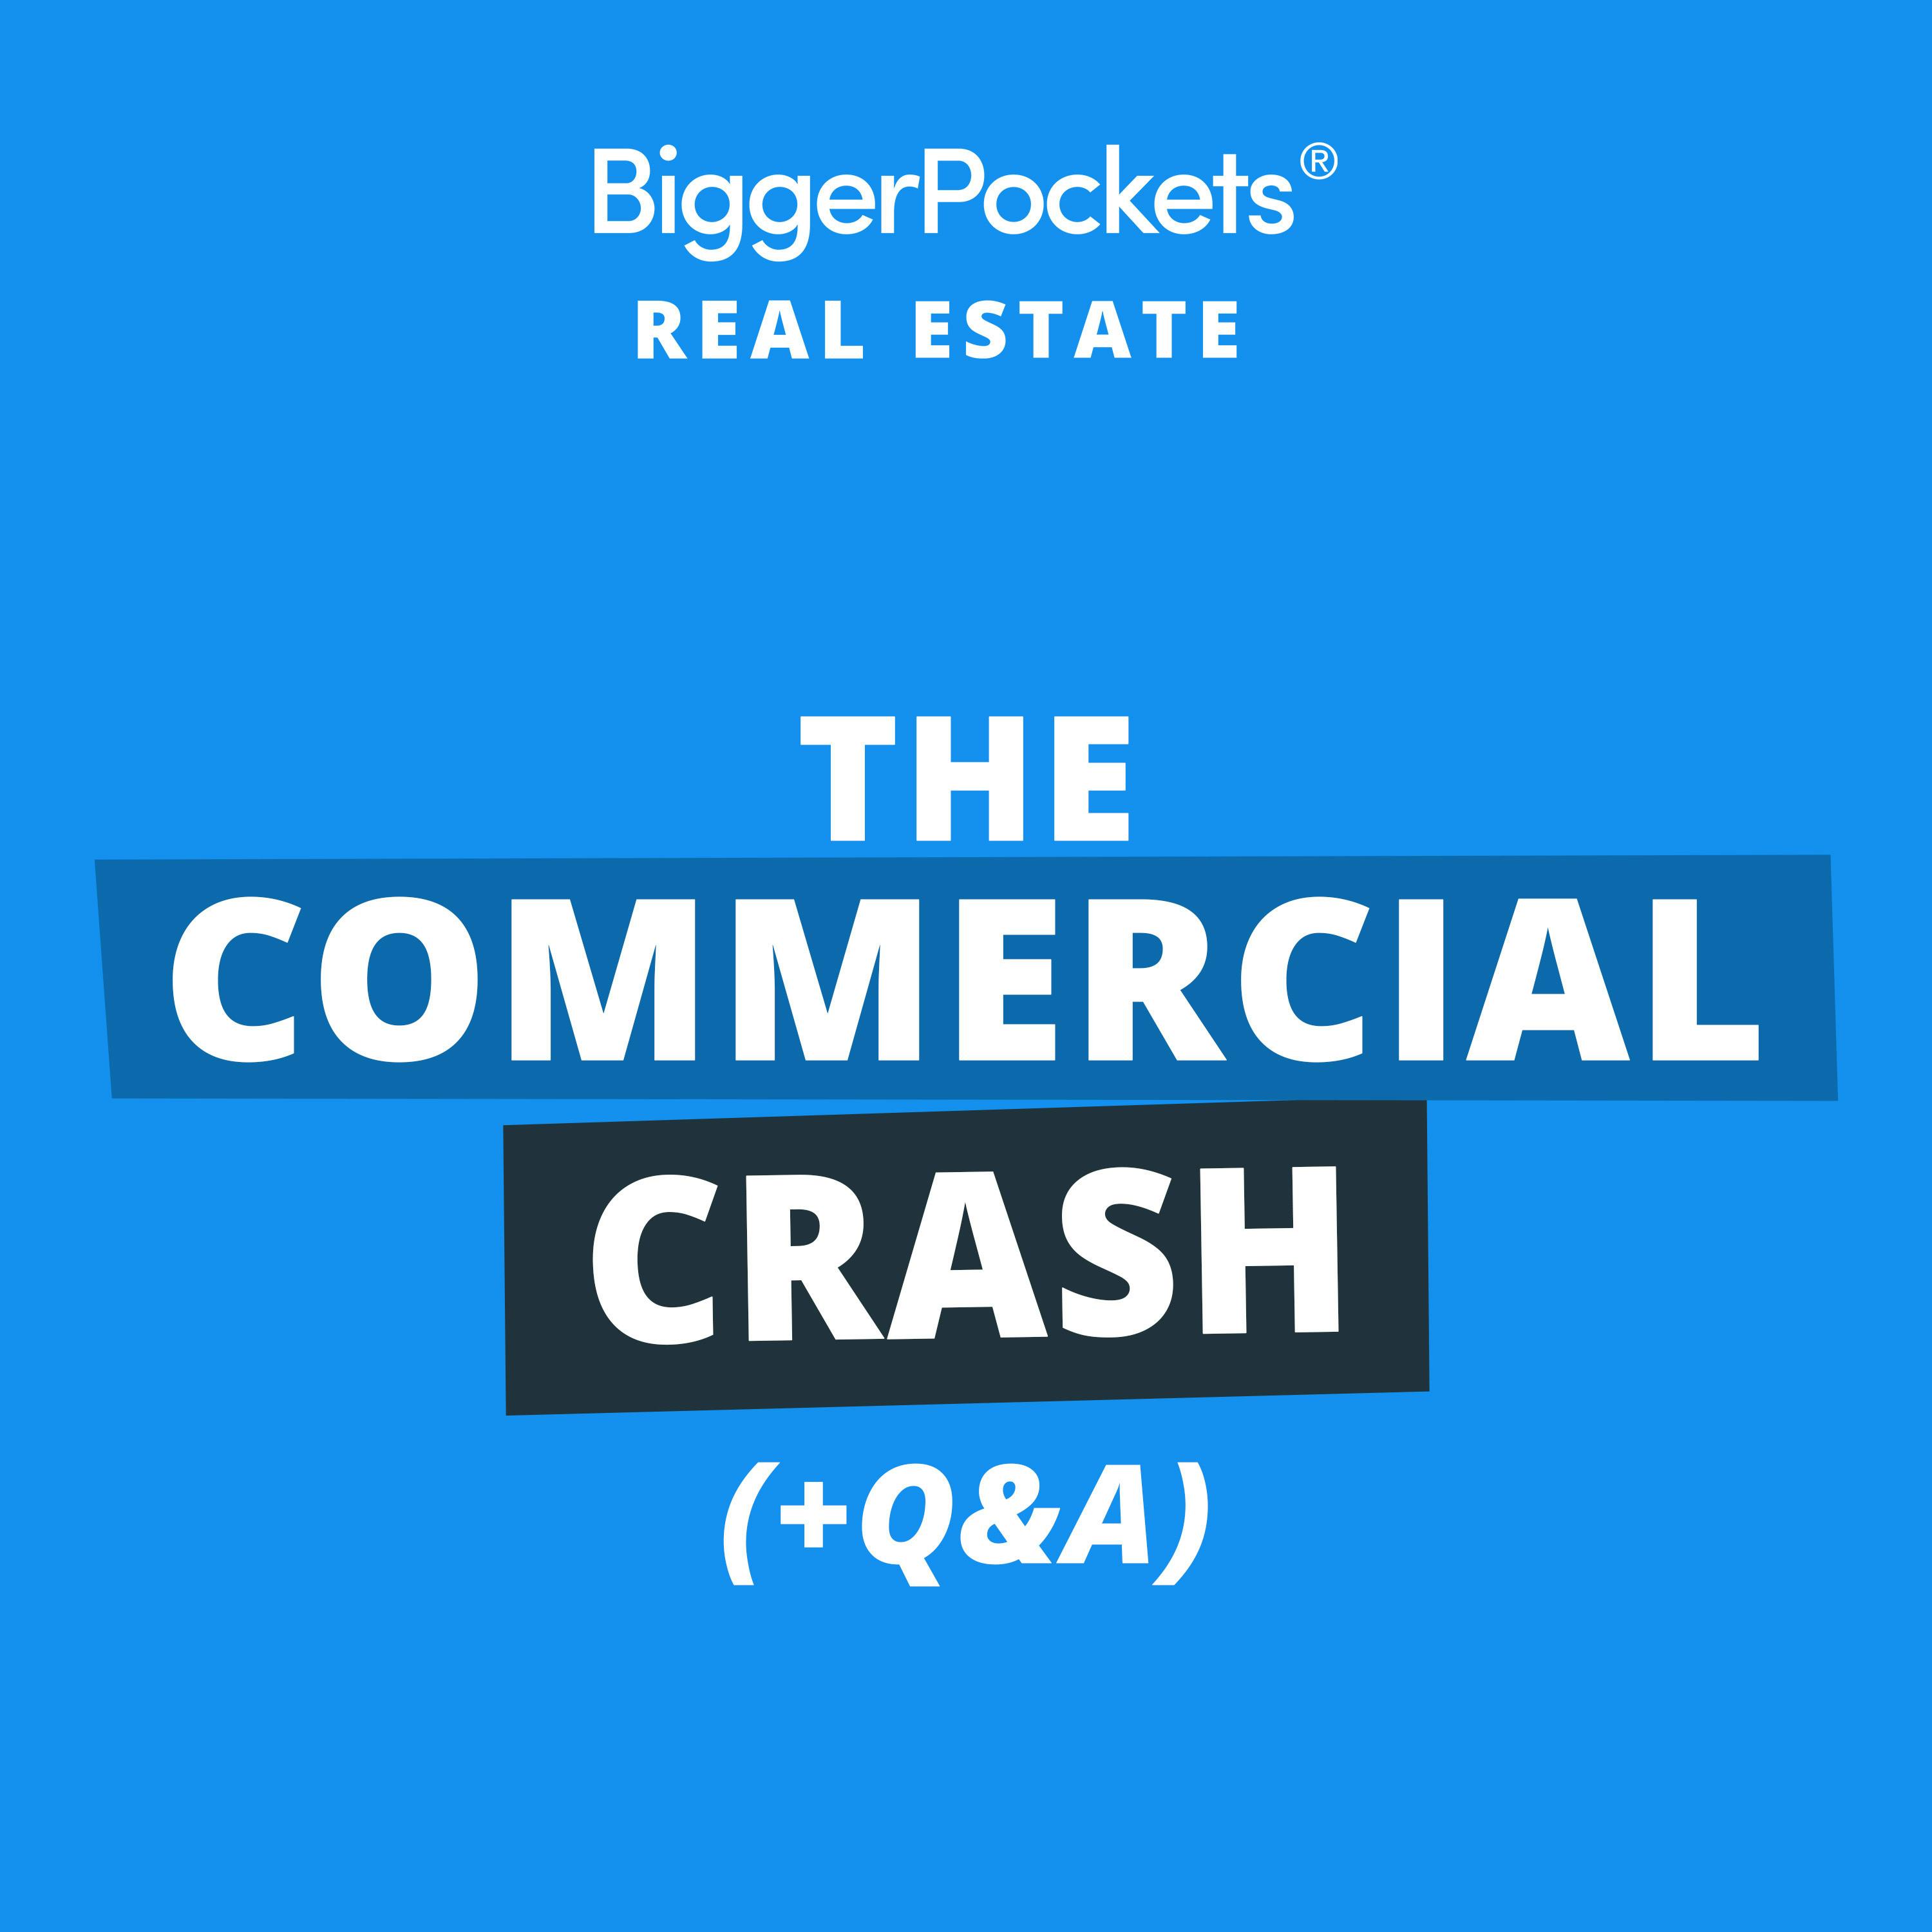 721: Commercial Real Estate Could Crash, But Are Everyday Investors Impacted? w/BiggerPockets CEO Scott Trench